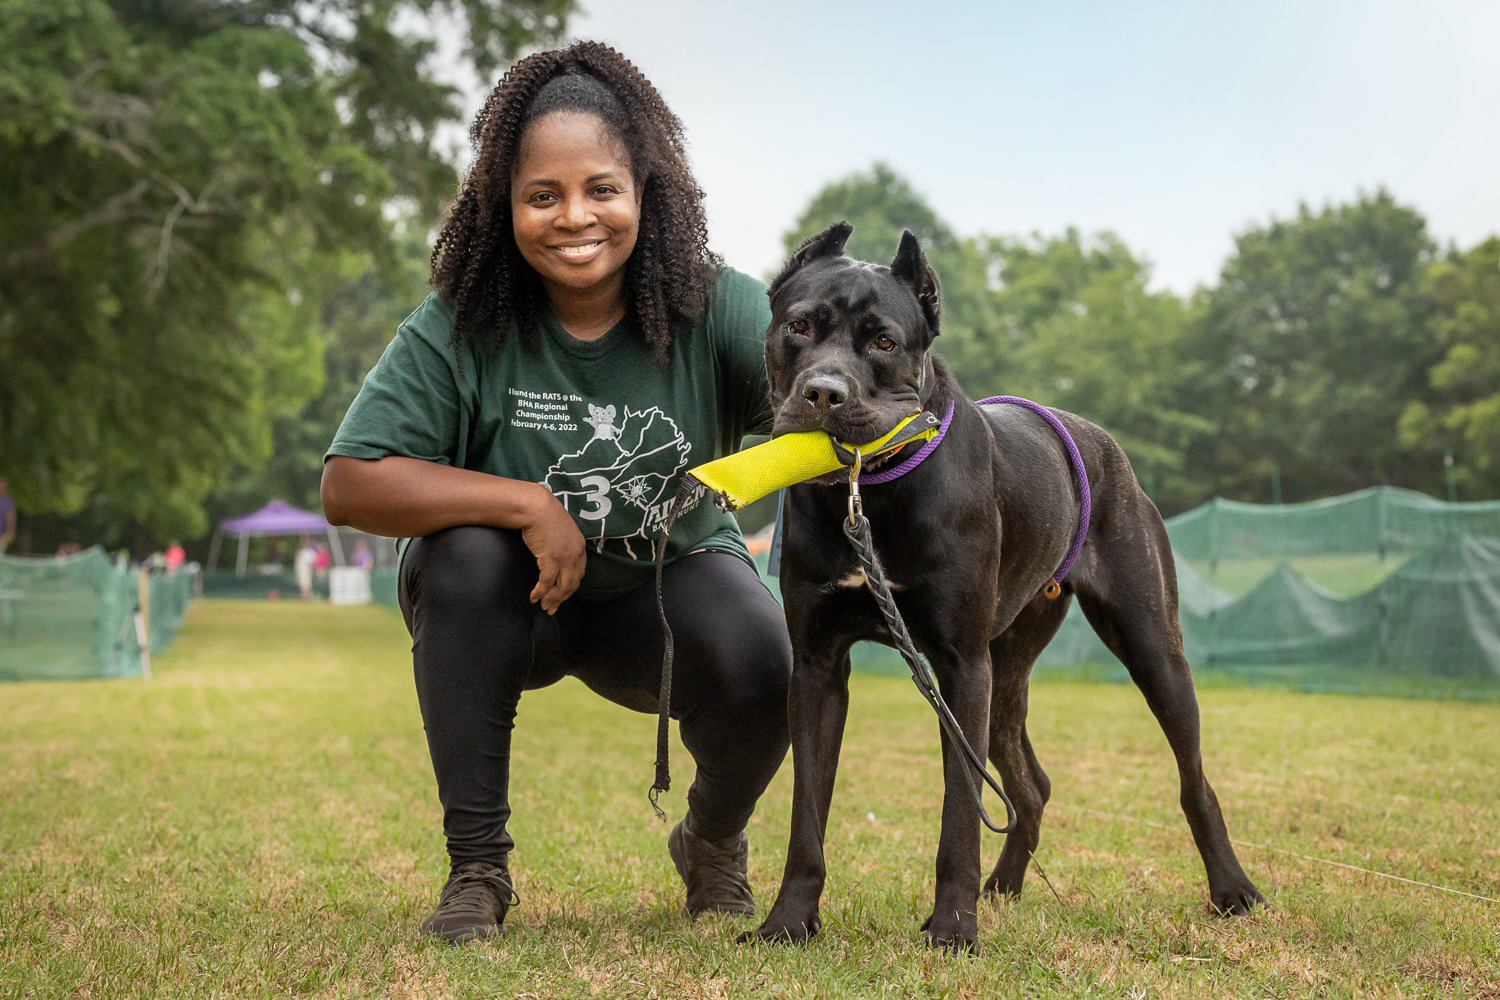 Candace Hood, a member of the Greater Columbia Obedience Club and Fast CAT/CAT Trial chair, with her cane corso, Alessia, in Hull, Ga., May 2022. Photography courtesy of Candace K. Hood